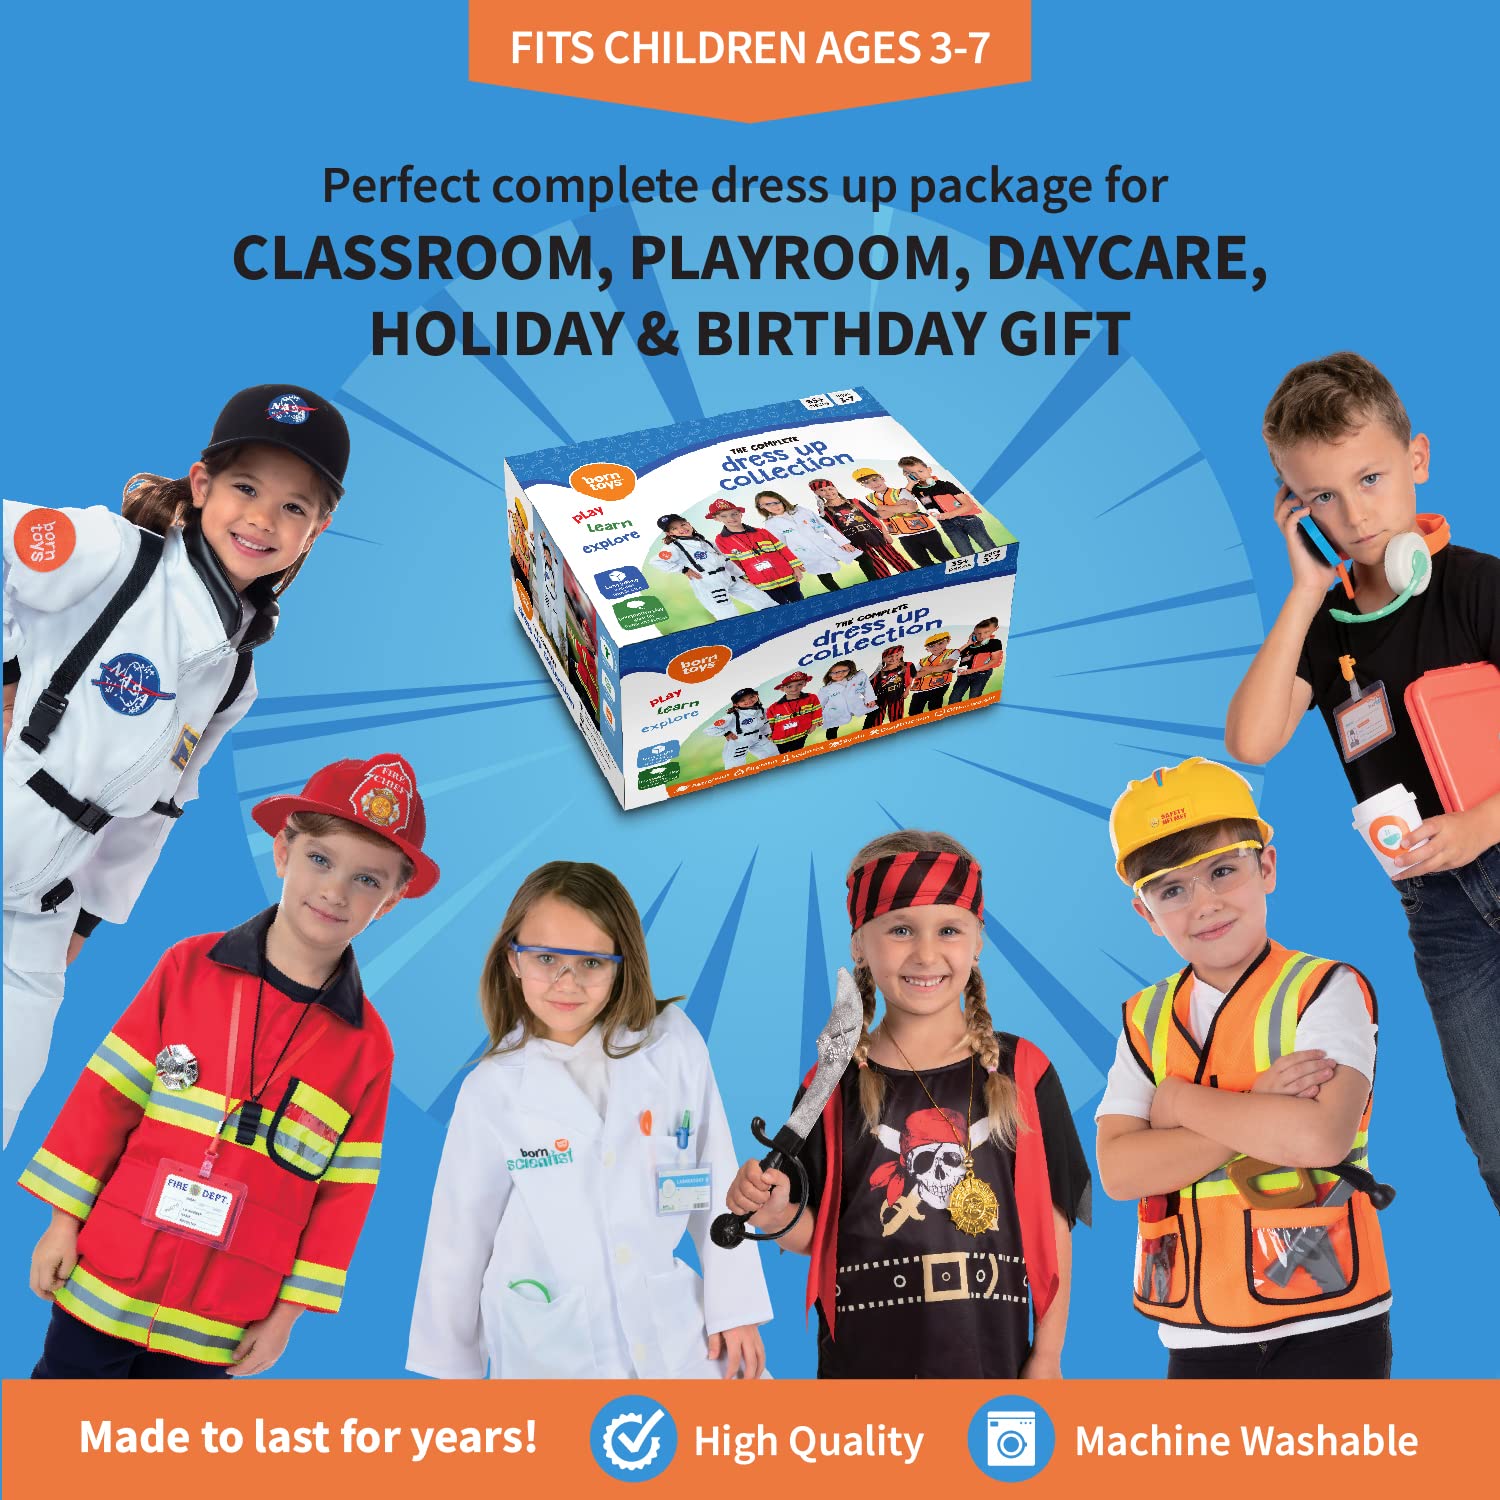 Born Toys 6-in-1 Kids' Dress Up & Pretend Play Firefighter, Astronaut, Scientist, Construction, Pirate, Office Set and Doctor Set